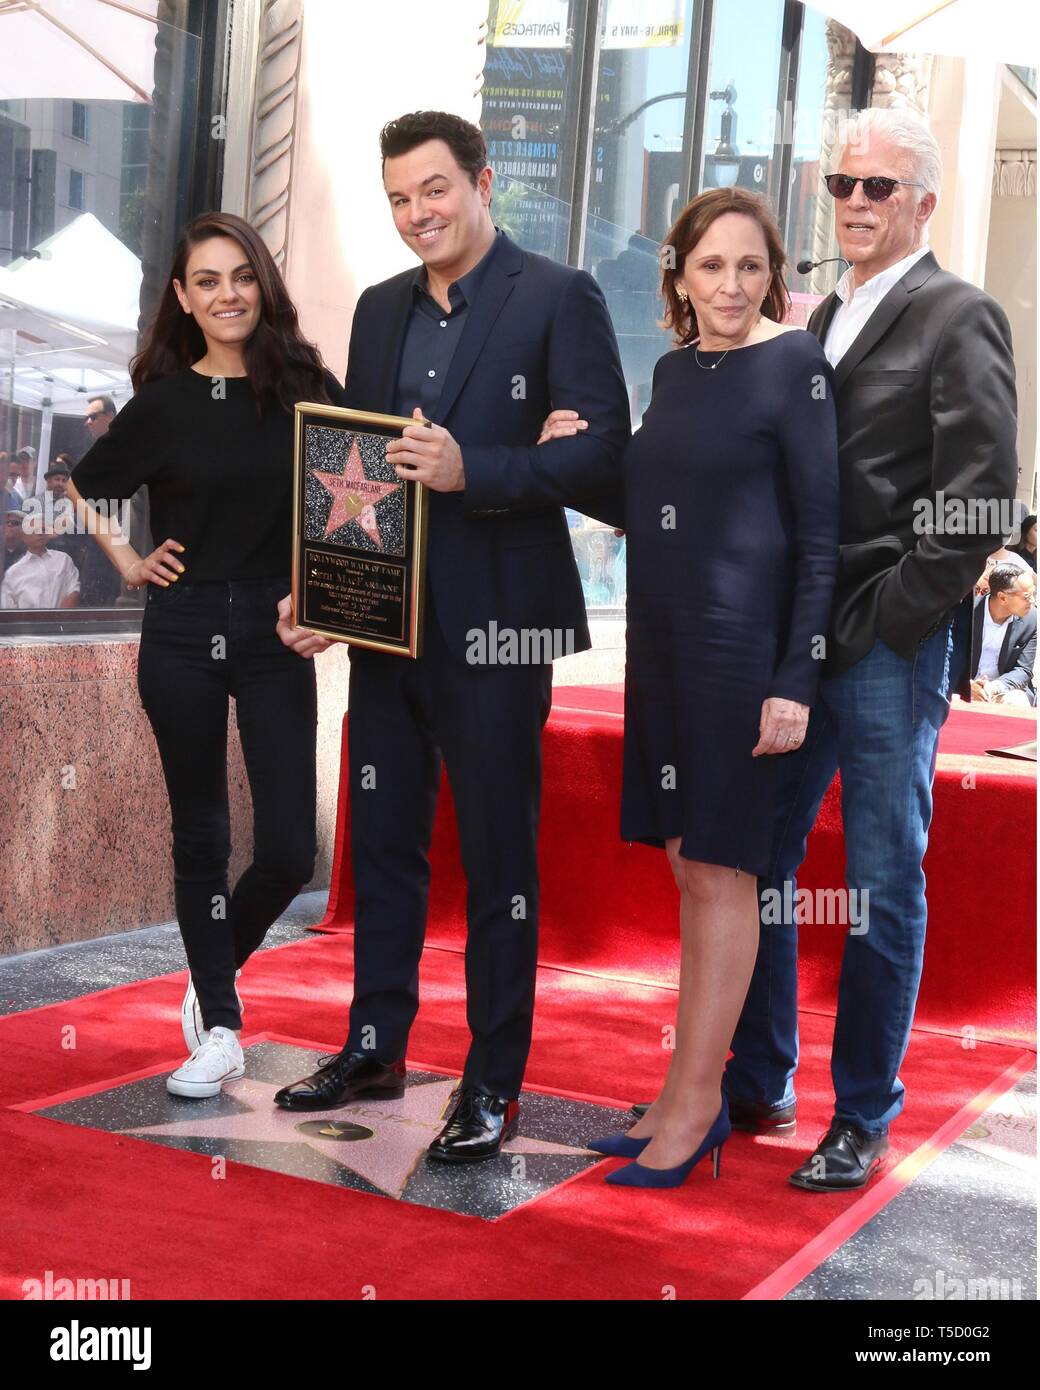 Los Angeles, CA, USA. 23rd Apr, 2019. Mila Kunis, Seth MacFarlane, Ann Druyan, Ted Danson at the induction ceremony for Star on the Hollywood Walk of Fame for Seth McFarland, Hollywood Boulevard, Los Angeles, CA April 23, 2019. Credit: Priscilla Grant/Everett Collection/Alamy Live News Stock Photo